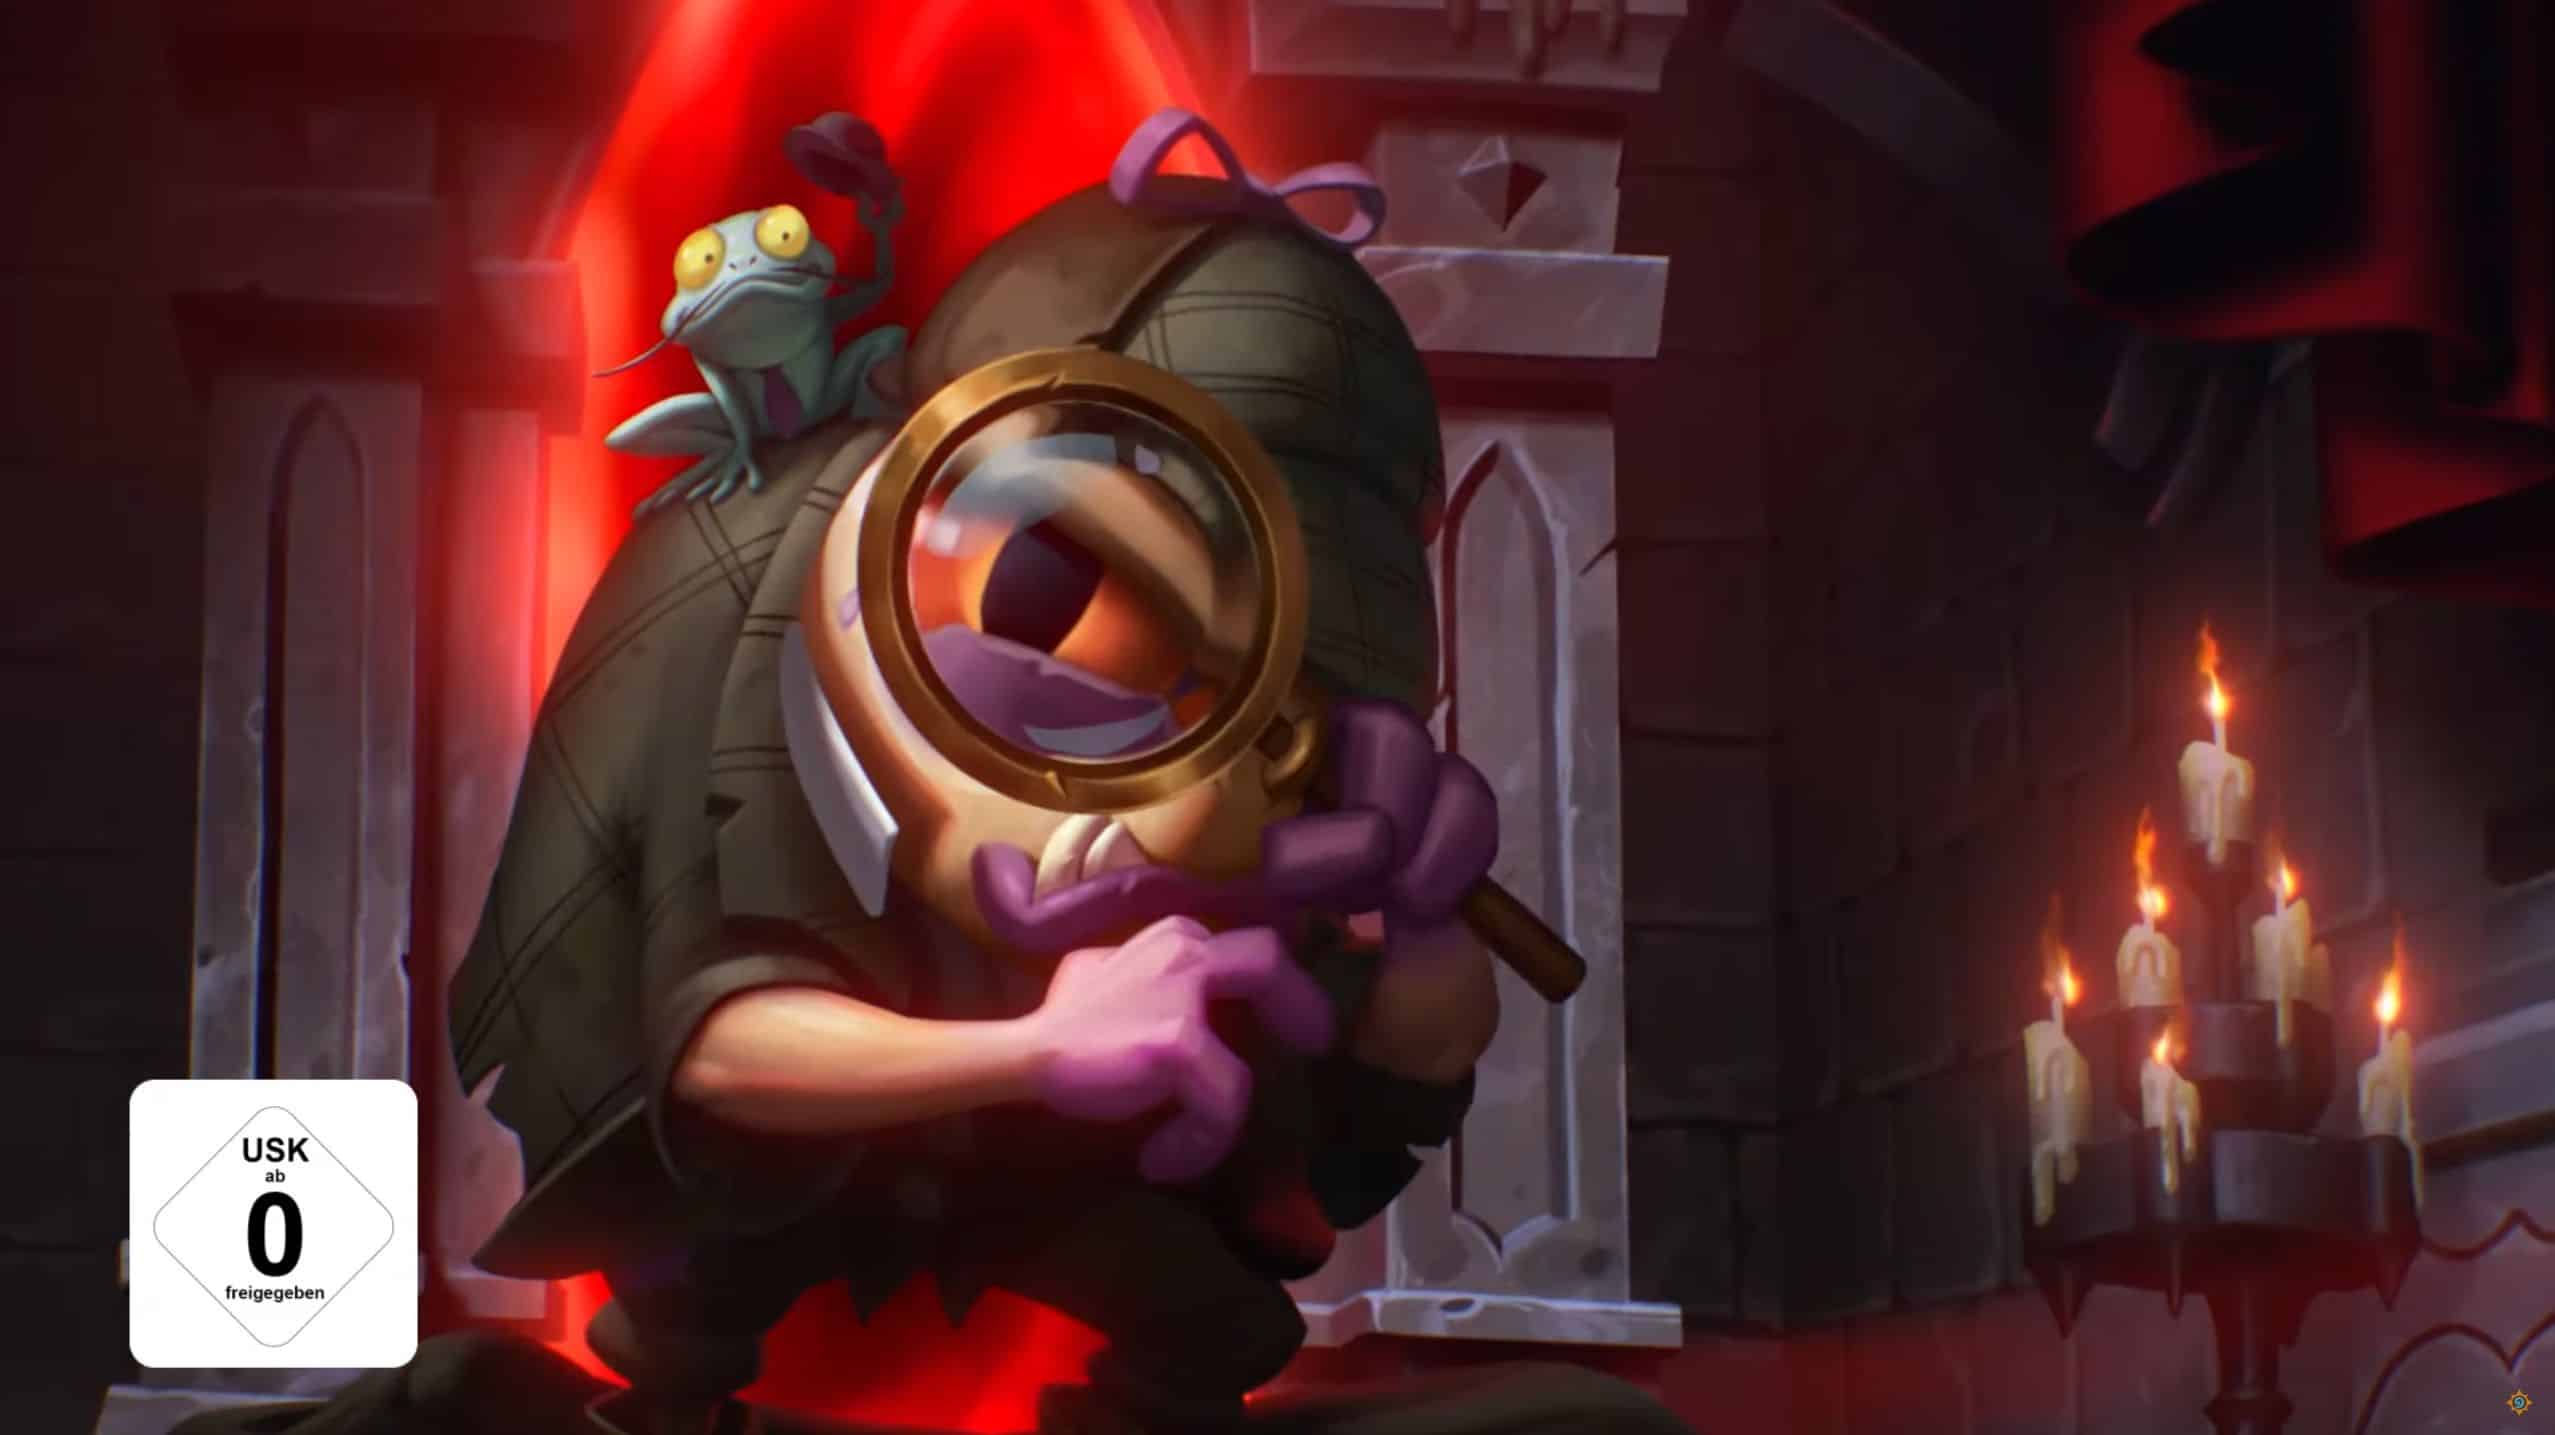 Hearthstone: Murder at Castle Nathria Overview Trailer